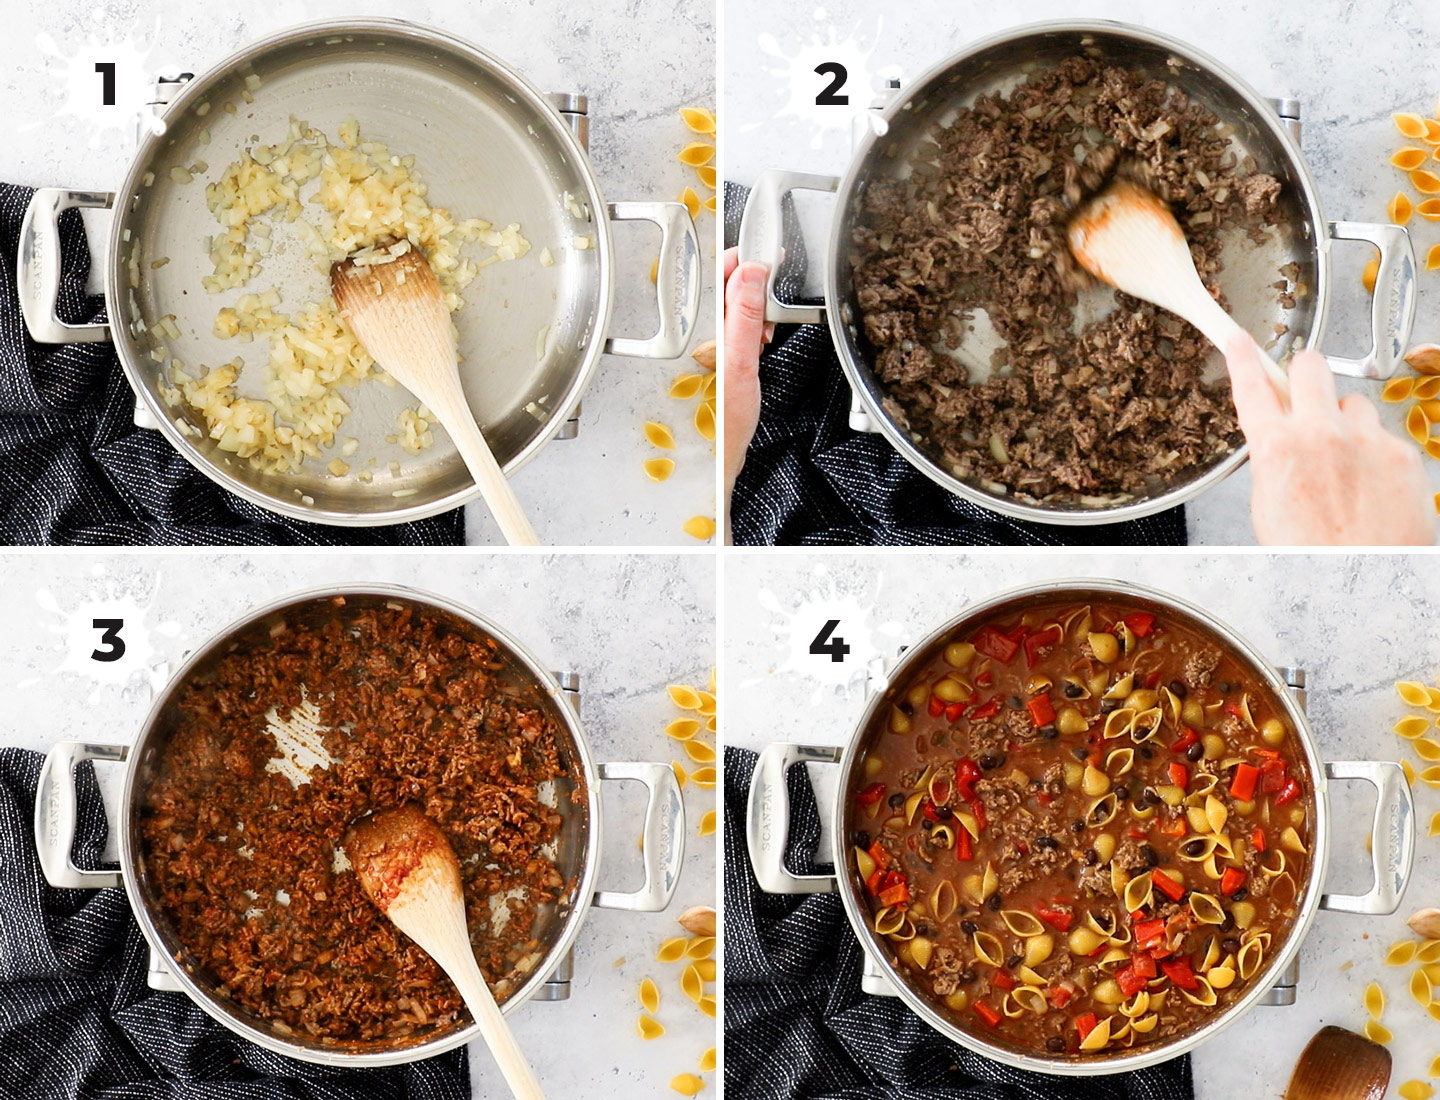 A collage showing how to cook the ingredients.